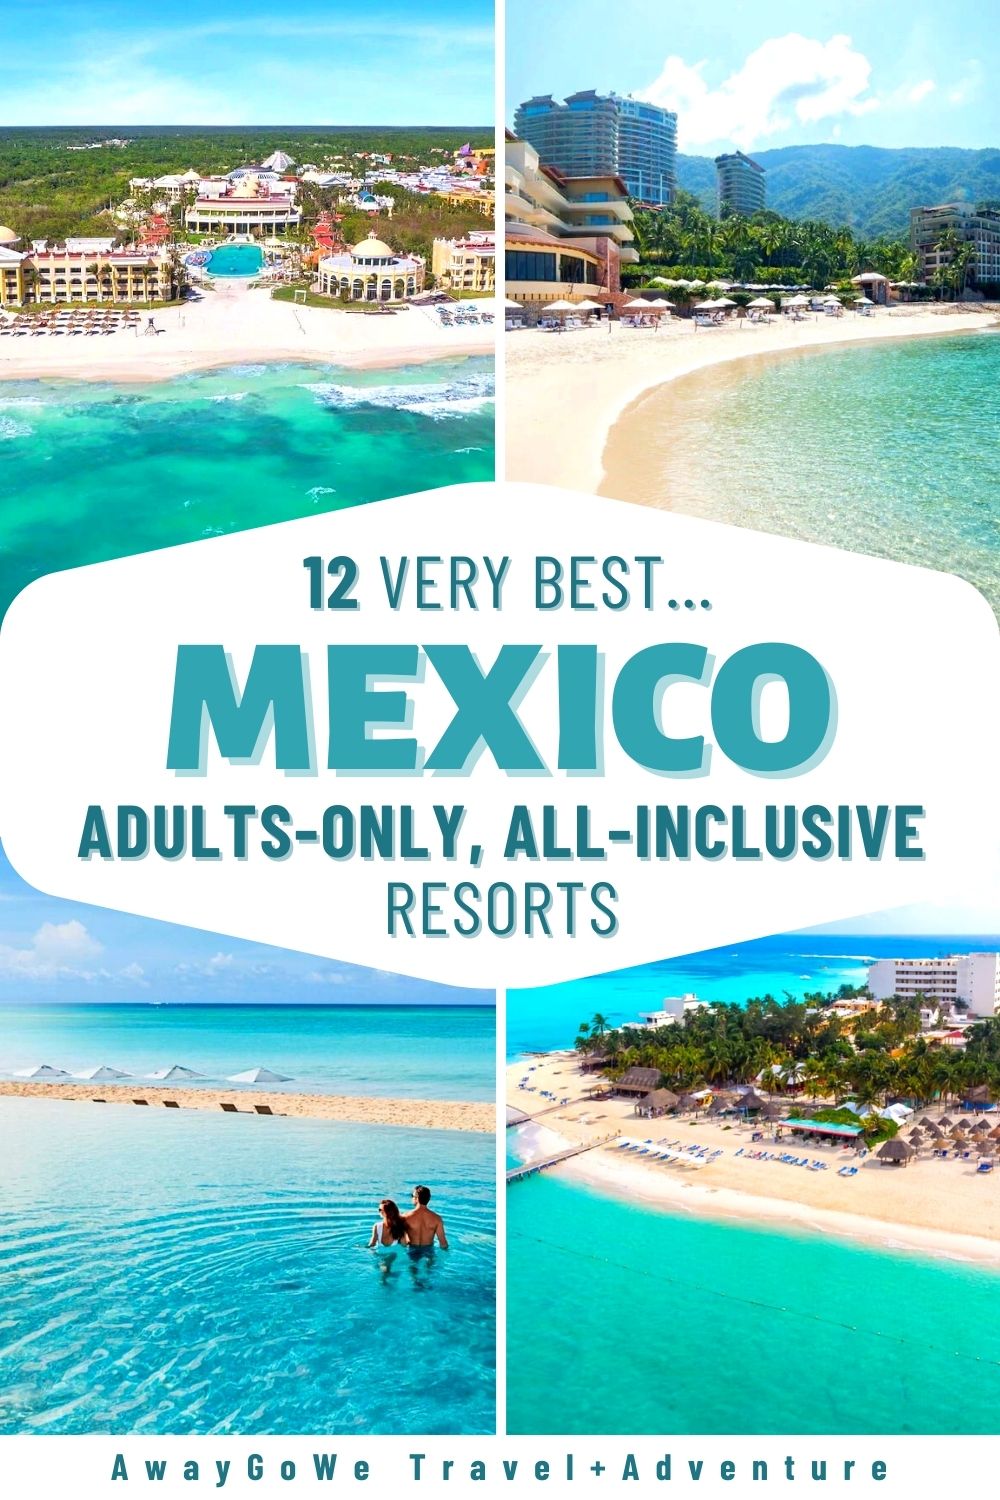 adults-only all-inclusive resorts in Mexico